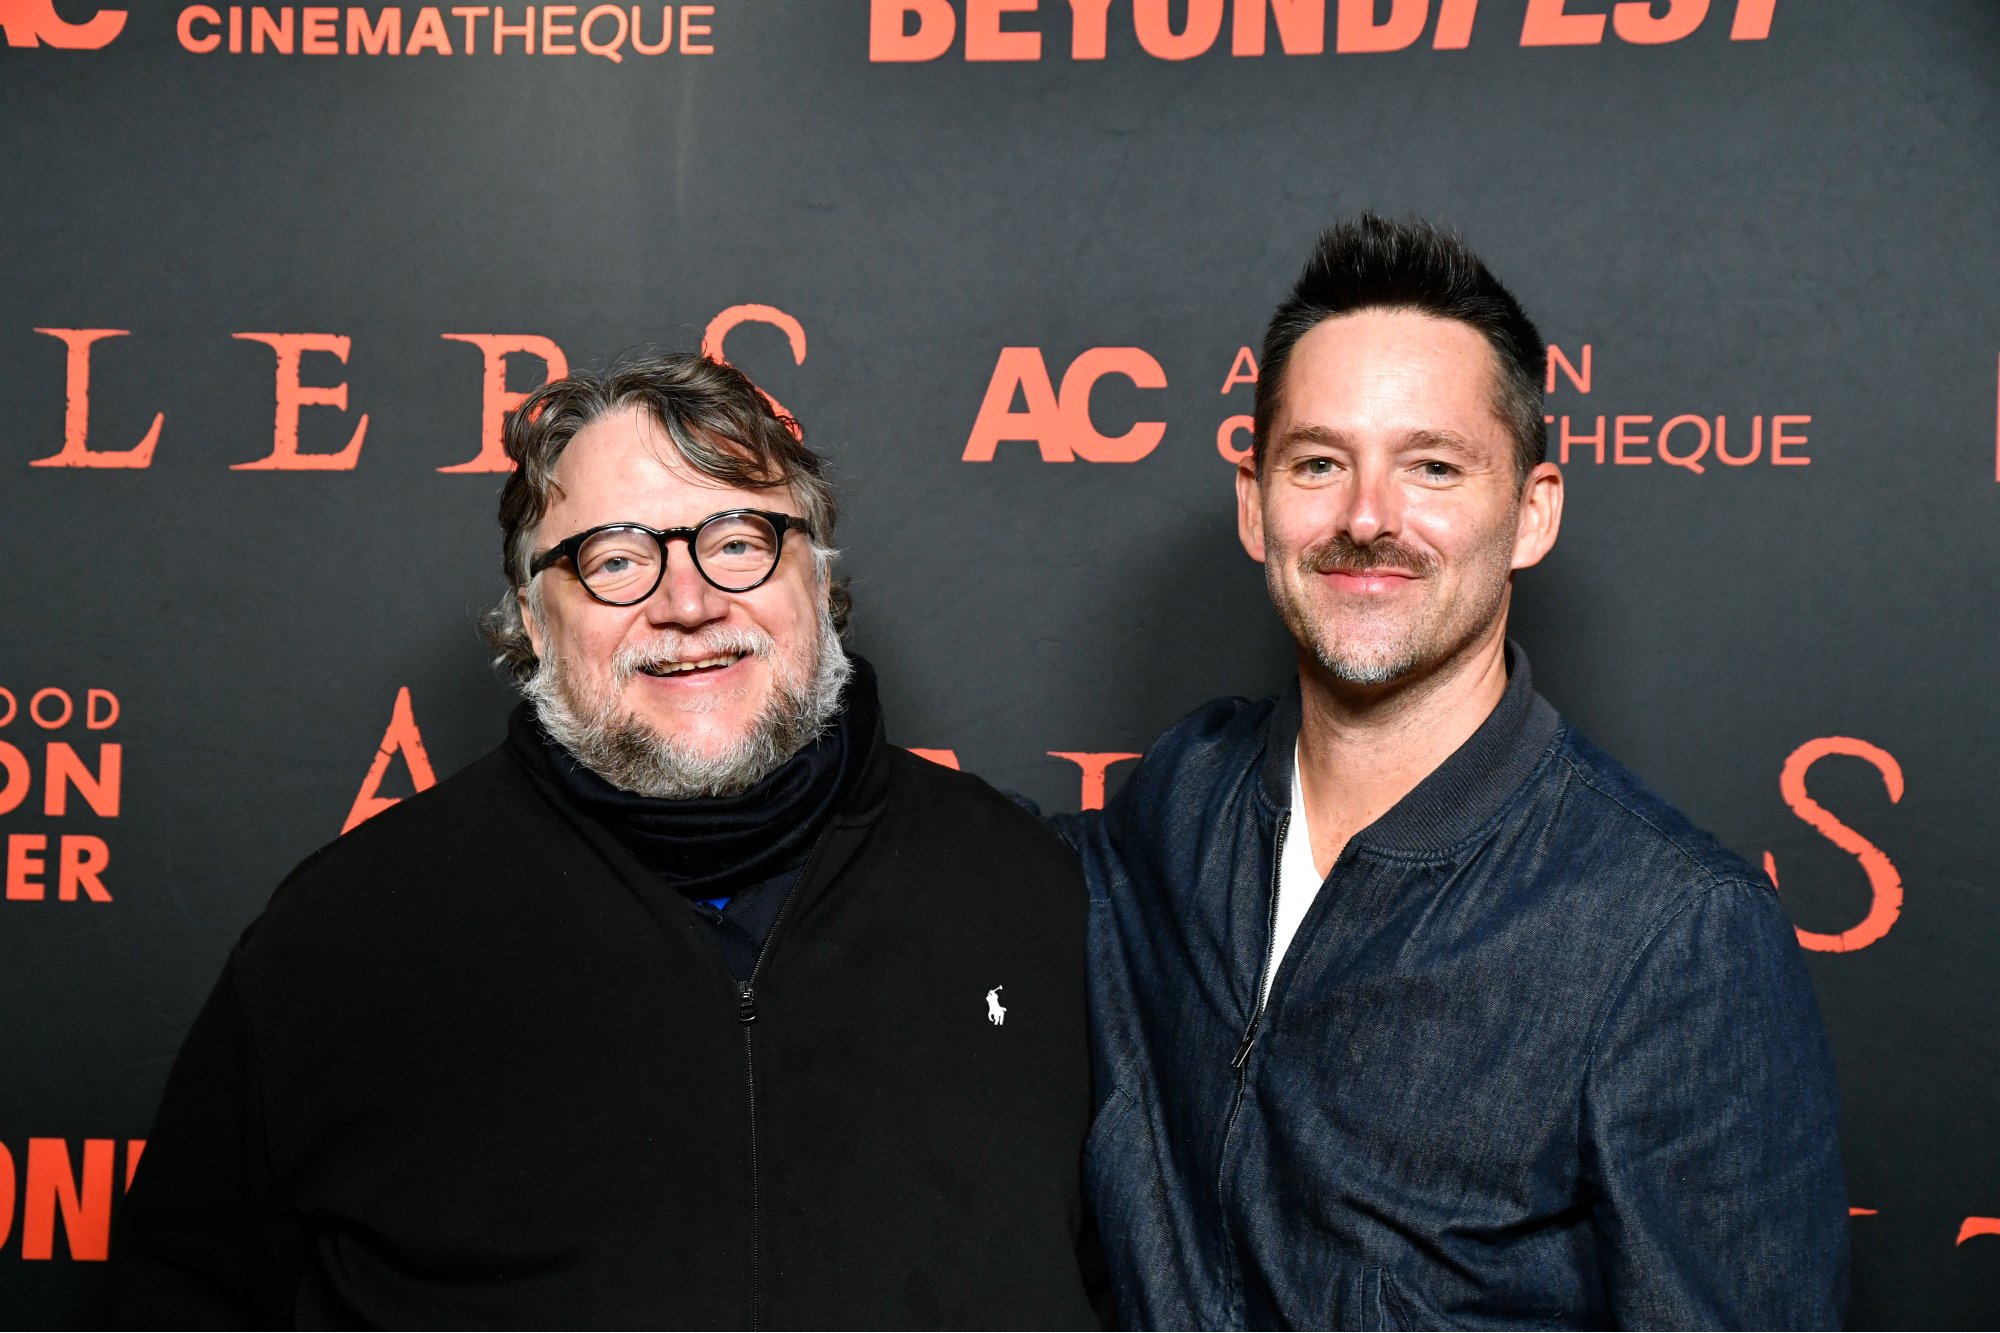 'Antlers' producer Guillermo del Toro and director Scott Cooper smiling in front of a step and repeat